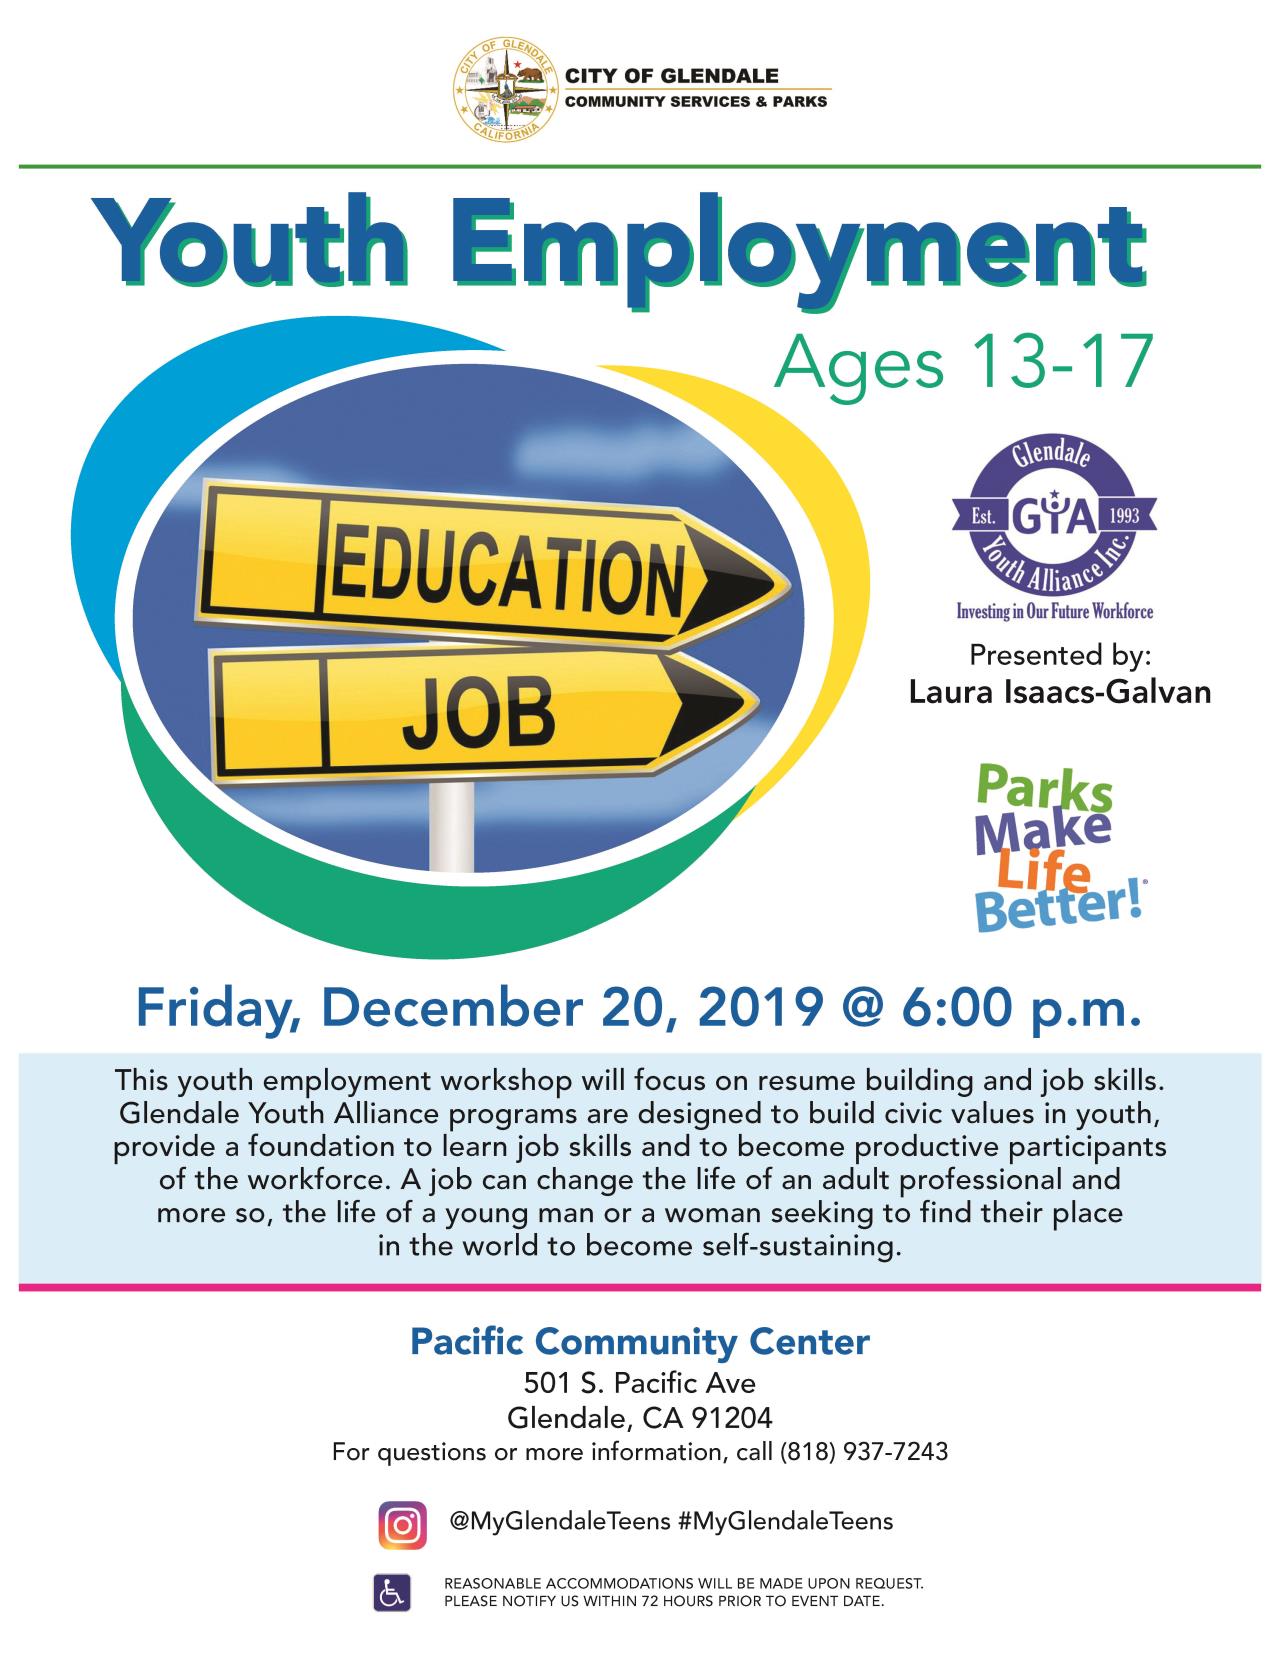 Youth Employment Flyer 2019 #2 UPDATED